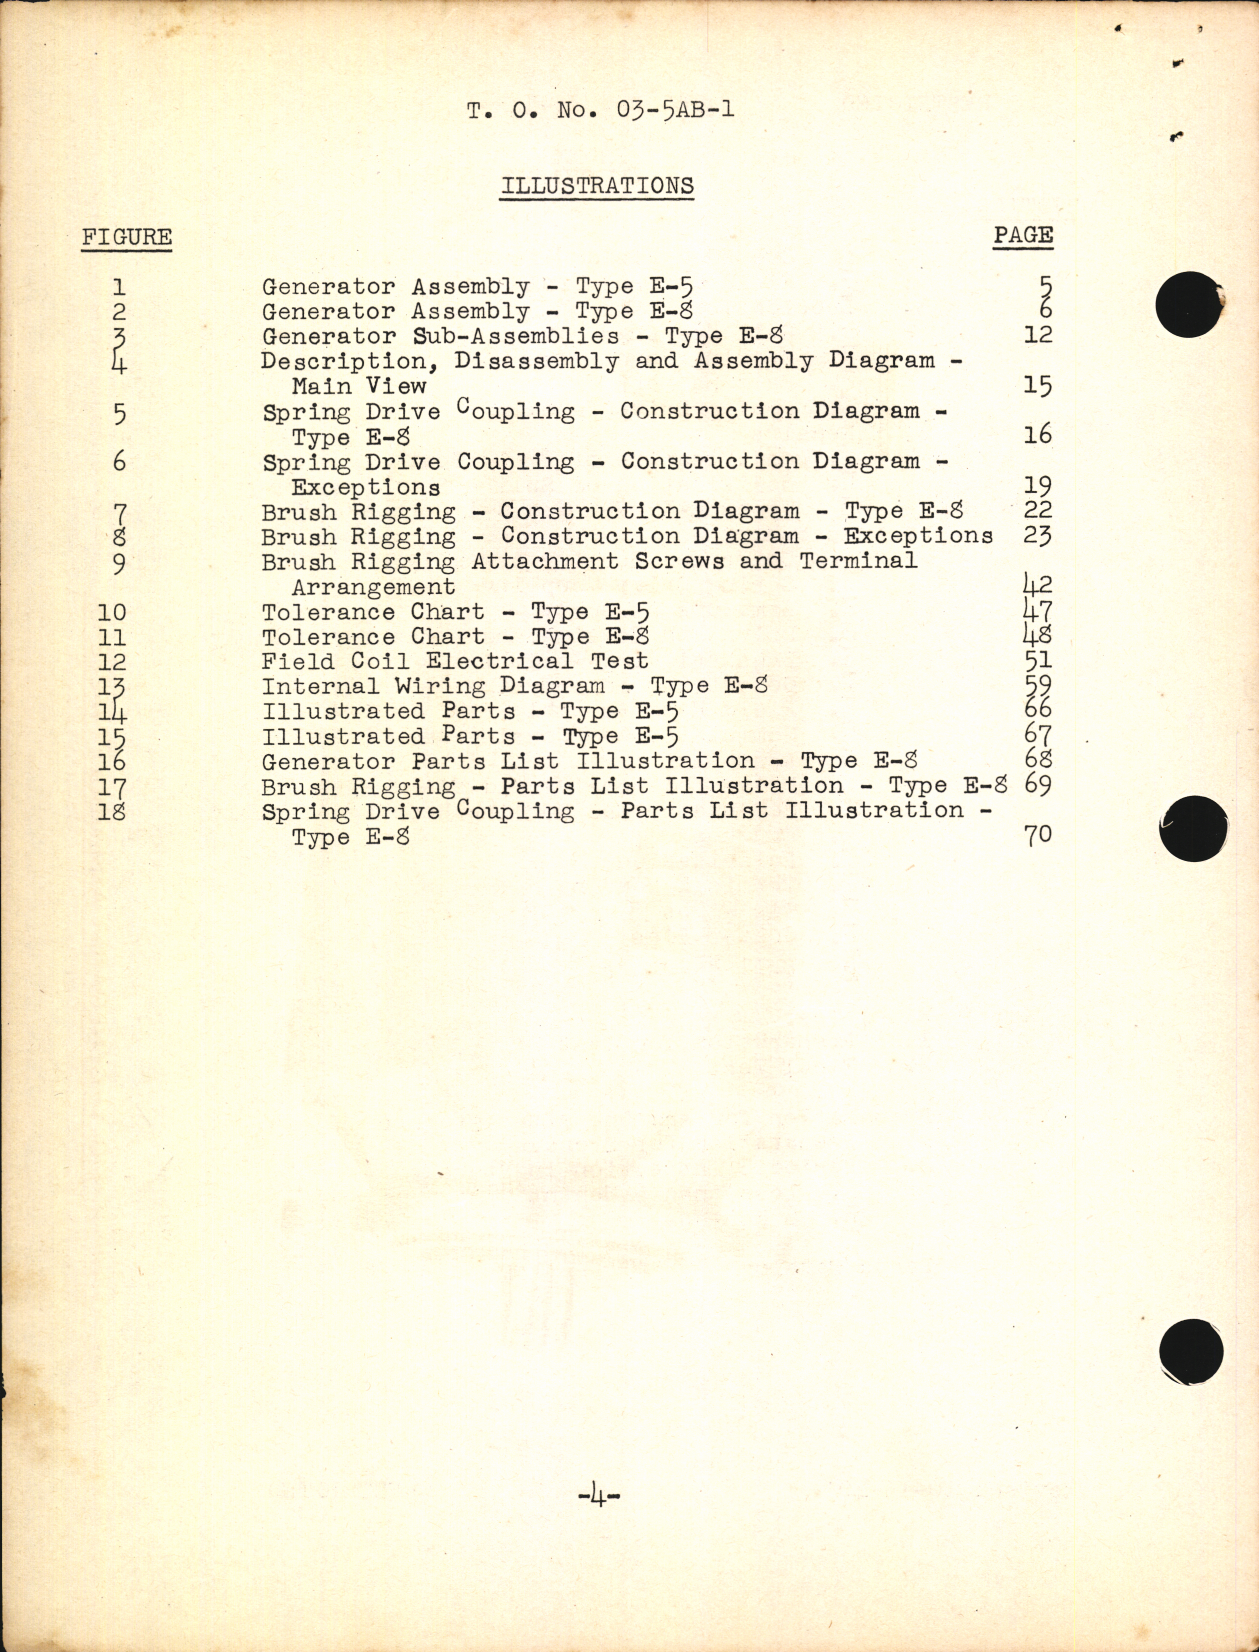 Sample page 6 from AirCorps Library document: Handbook of Instructions with Parts Catalog for Aircraft Engine Generators and Control Box Types E5, E8, and D4